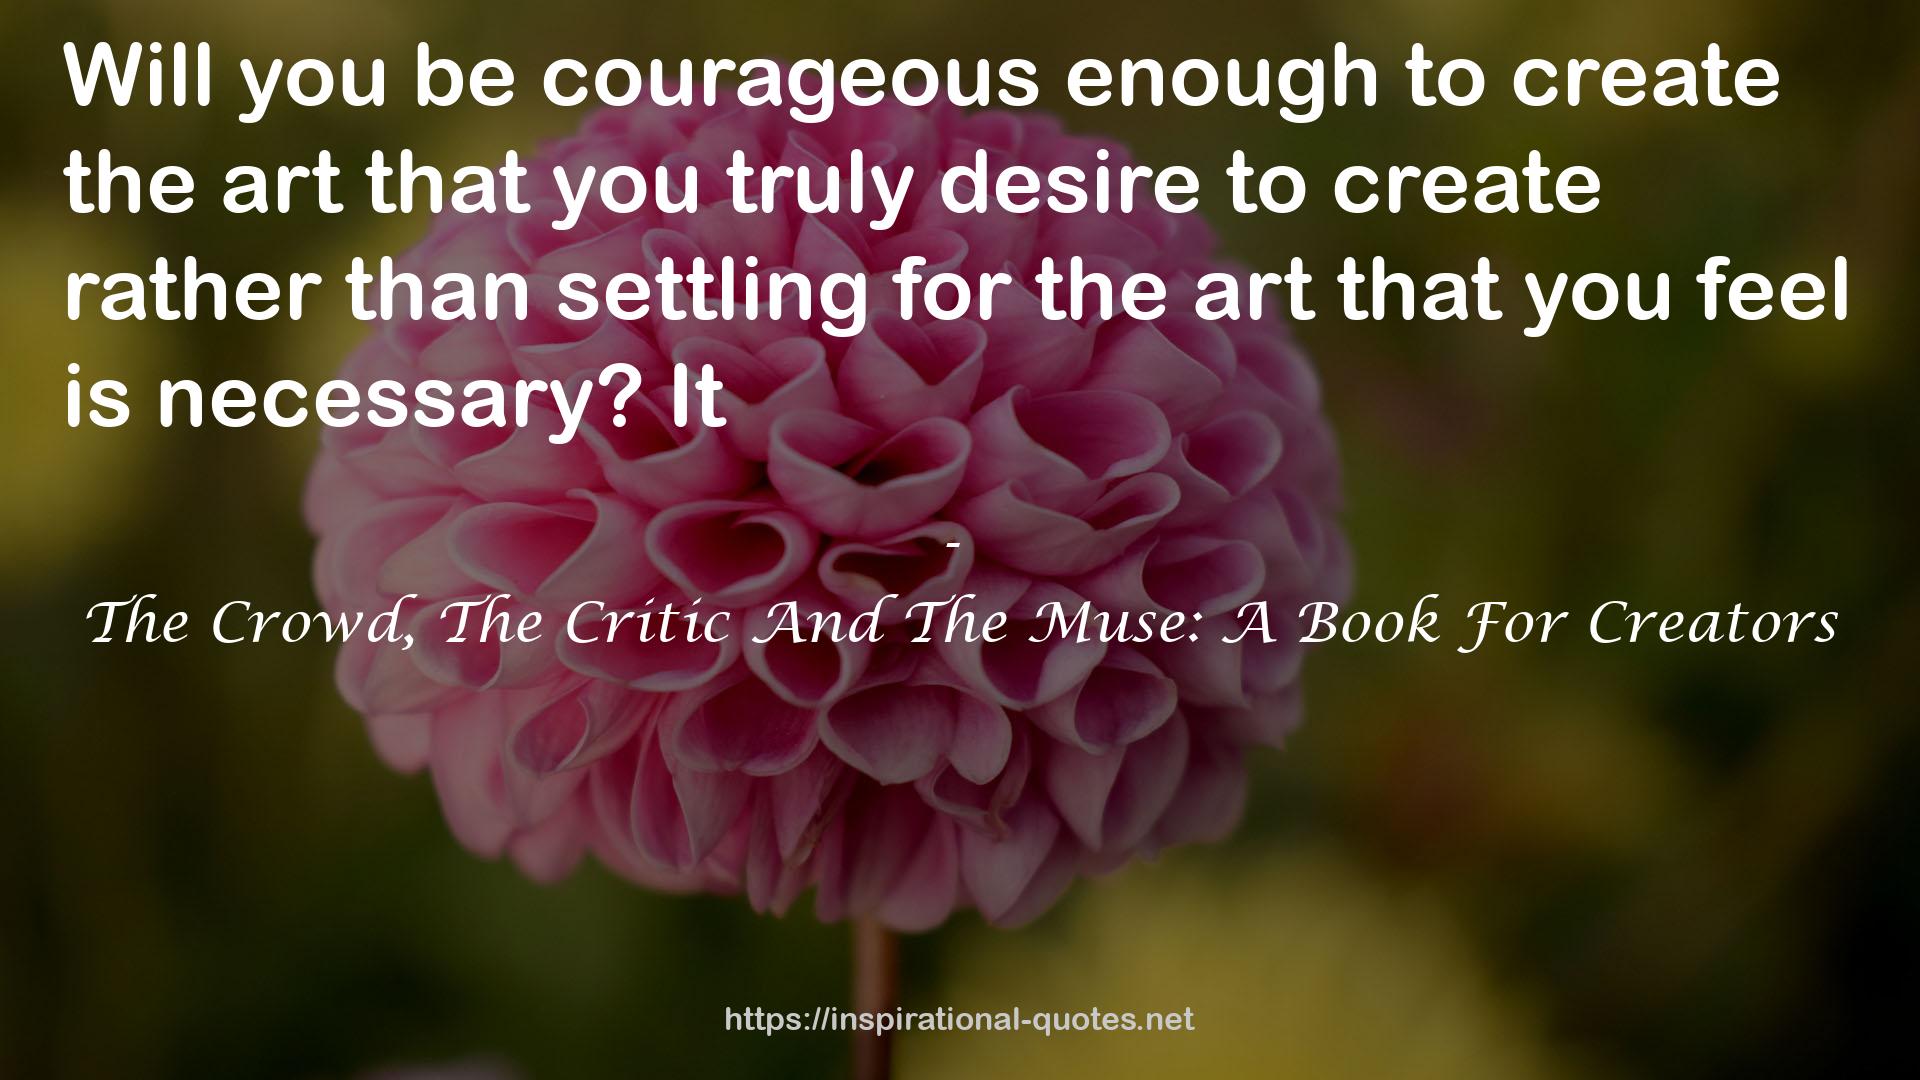 The Crowd, The Critic And The Muse: A Book For Creators QUOTES